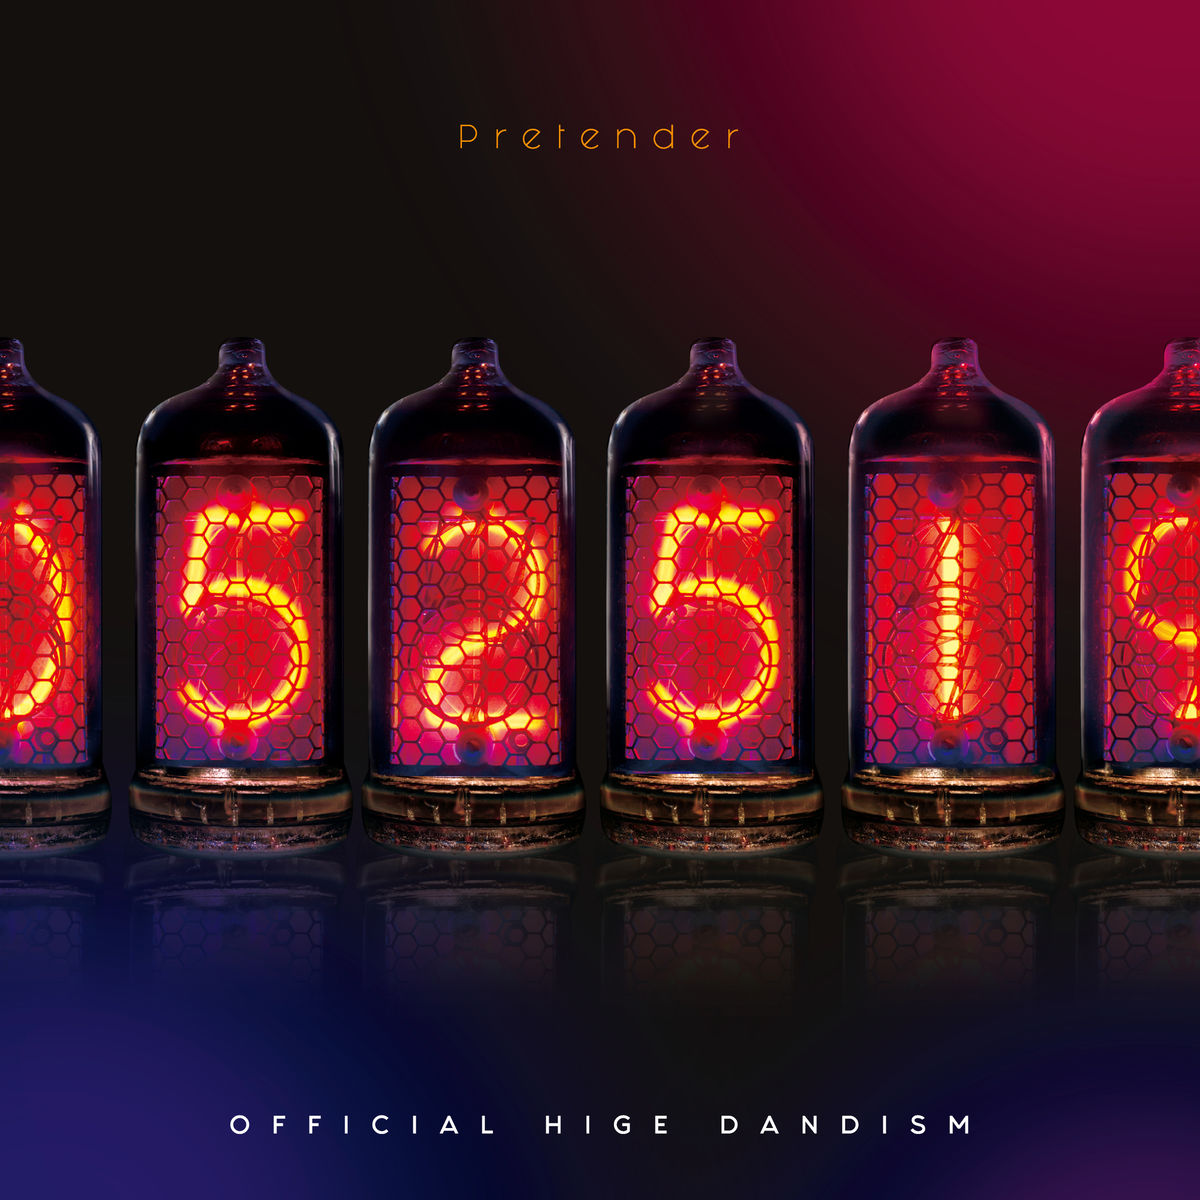 Cover art for『Official HIGE DANdism - Pretender』from the release『Pretender』